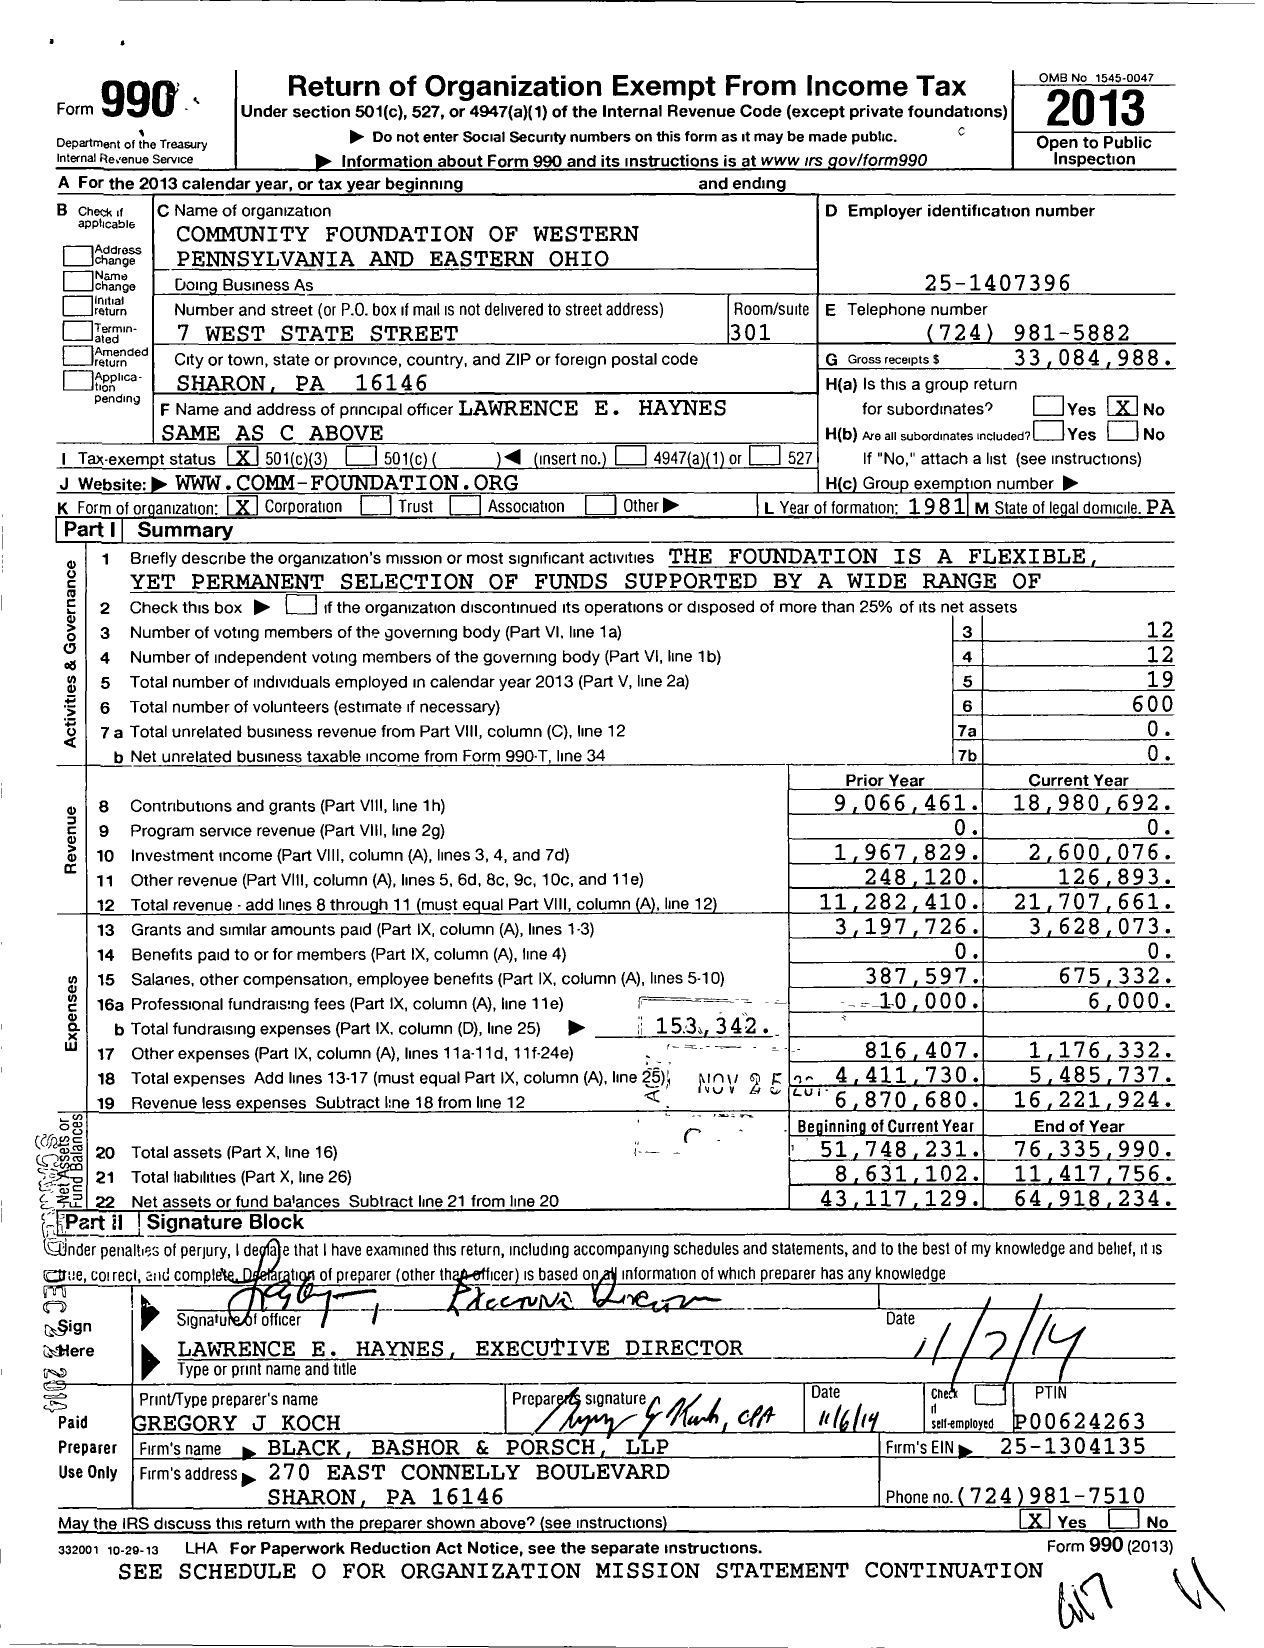 Image of first page of 2013 Form 990 for Community Foundation of Western Pennsylvania and Eastern Ohio